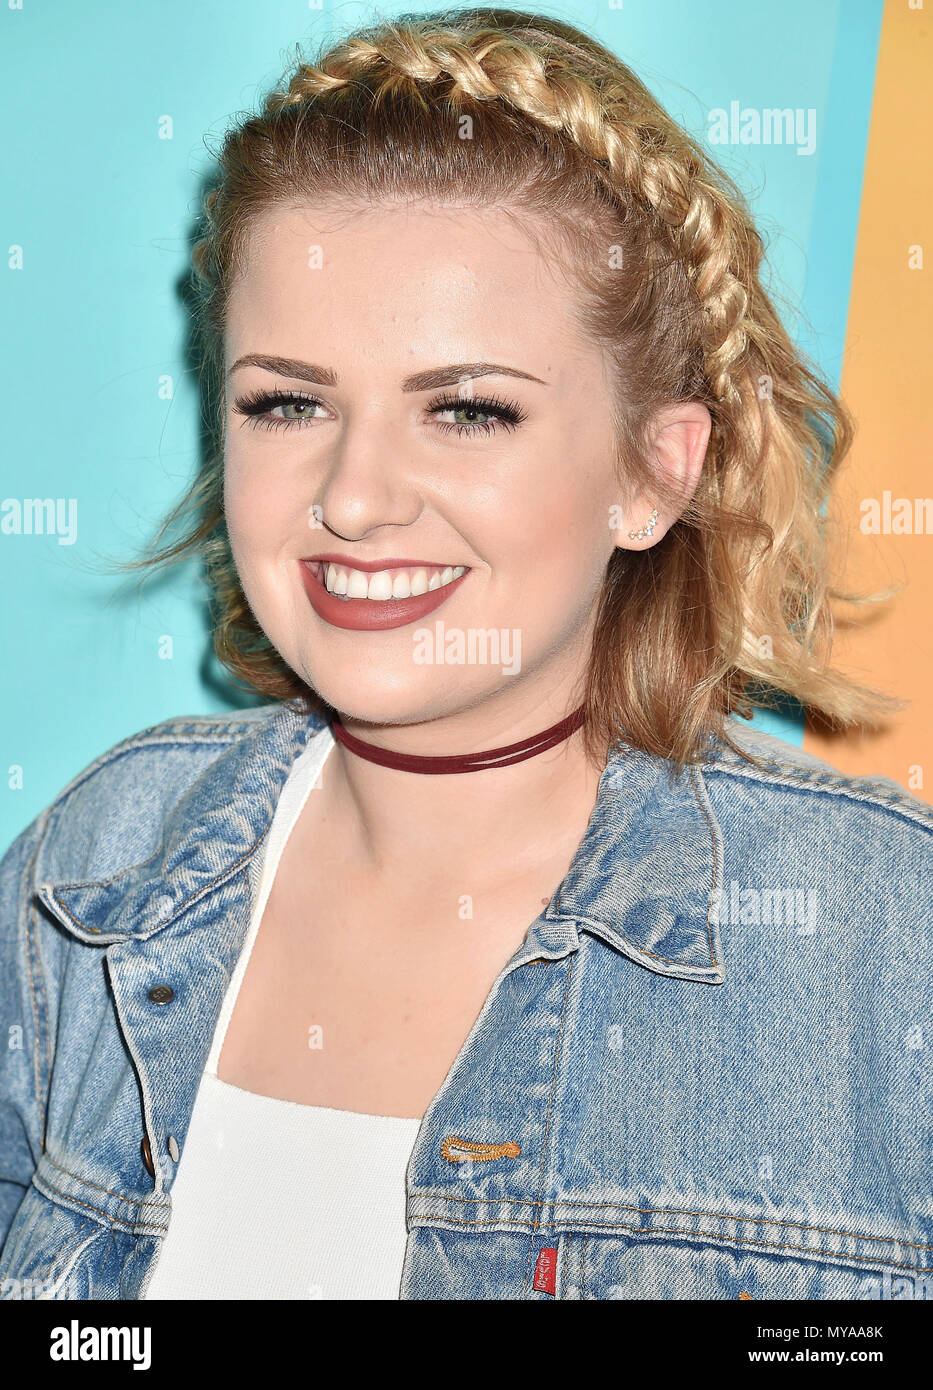 LOS ANGELES, CA - JUNE 02: Maddie Poppe arrives at the 2018 iHeartRadio Wango Tango by AT&T at Banc of California Stadium on June 2, 2018 in Los Angeles, California. Stock Photo